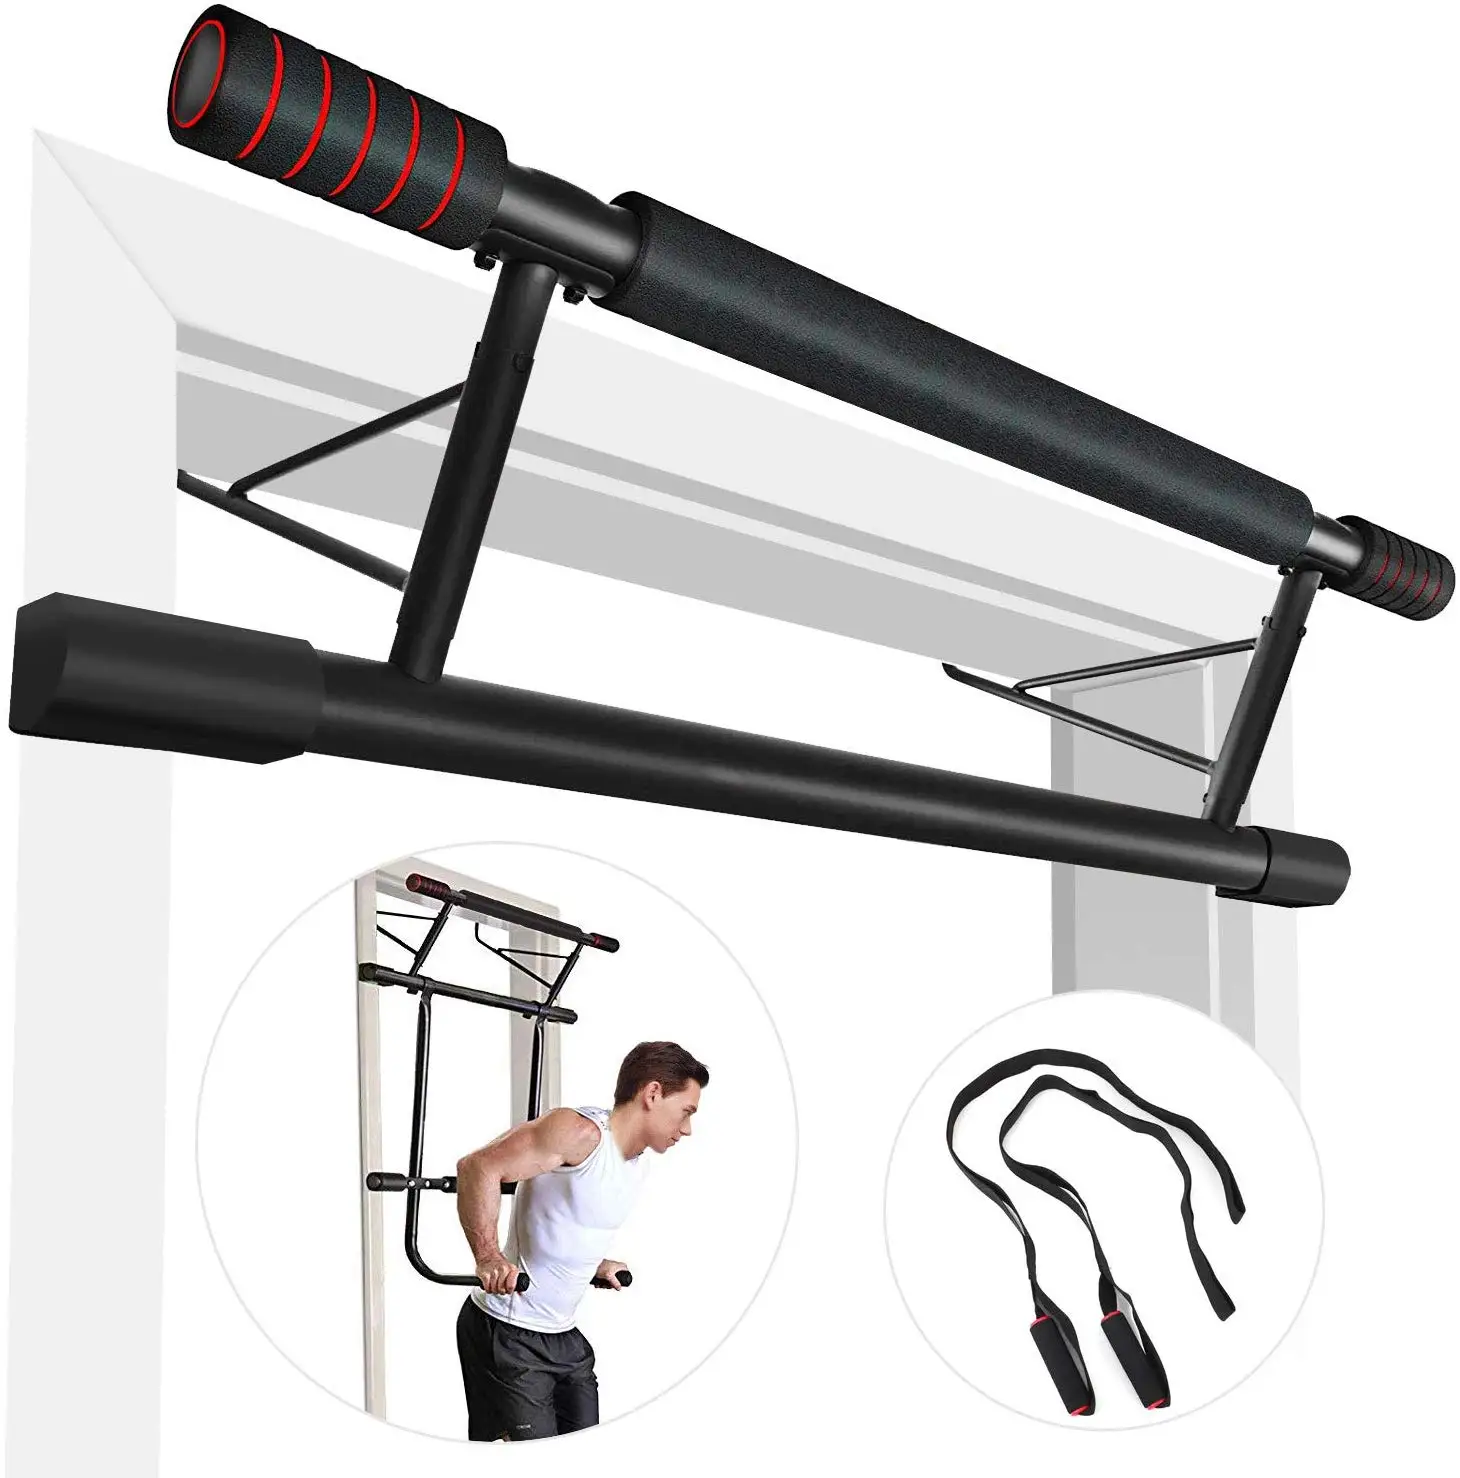 Estelys Foldable Pull-Up Bar Doorway Trainer Chin-Up Bars for Door Frames Without Screws/Drilling Workout for Home Gym Exercise 